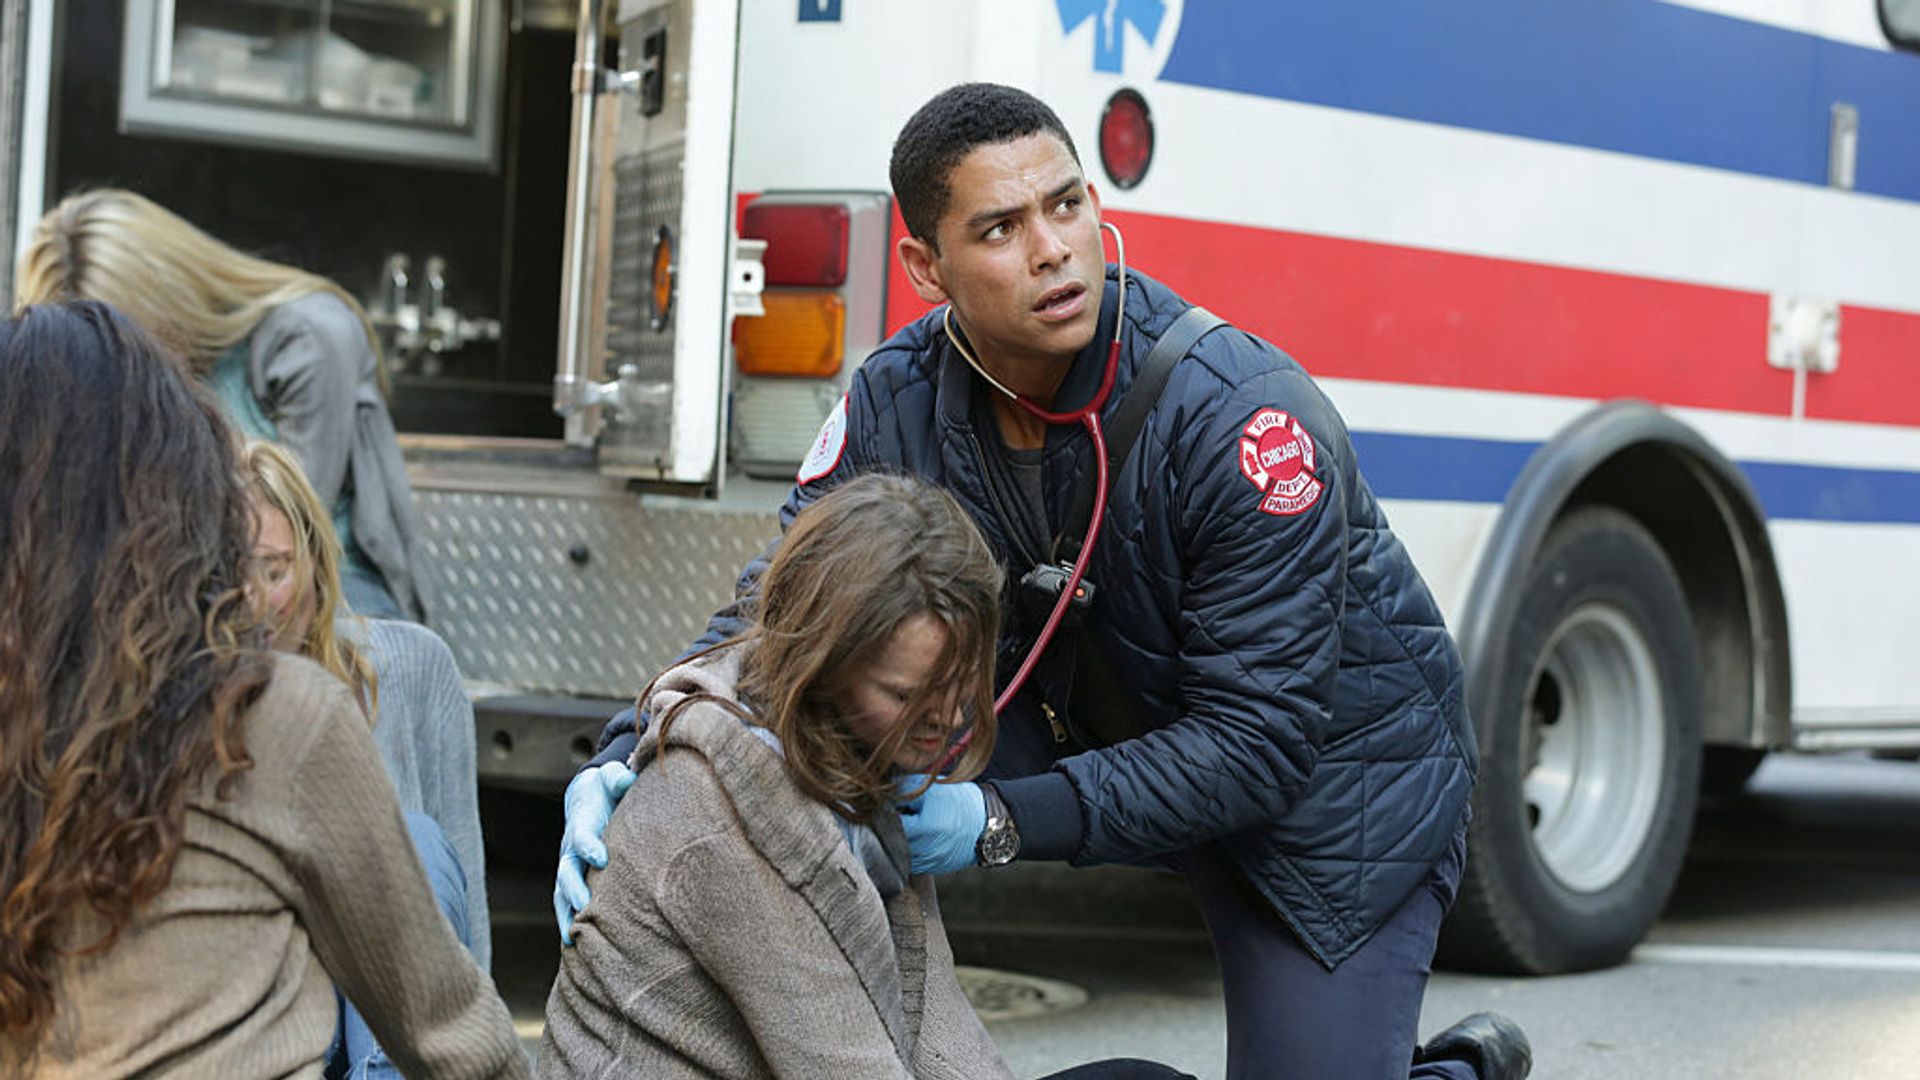 Peter tends to a woman in need in Chicago Fire